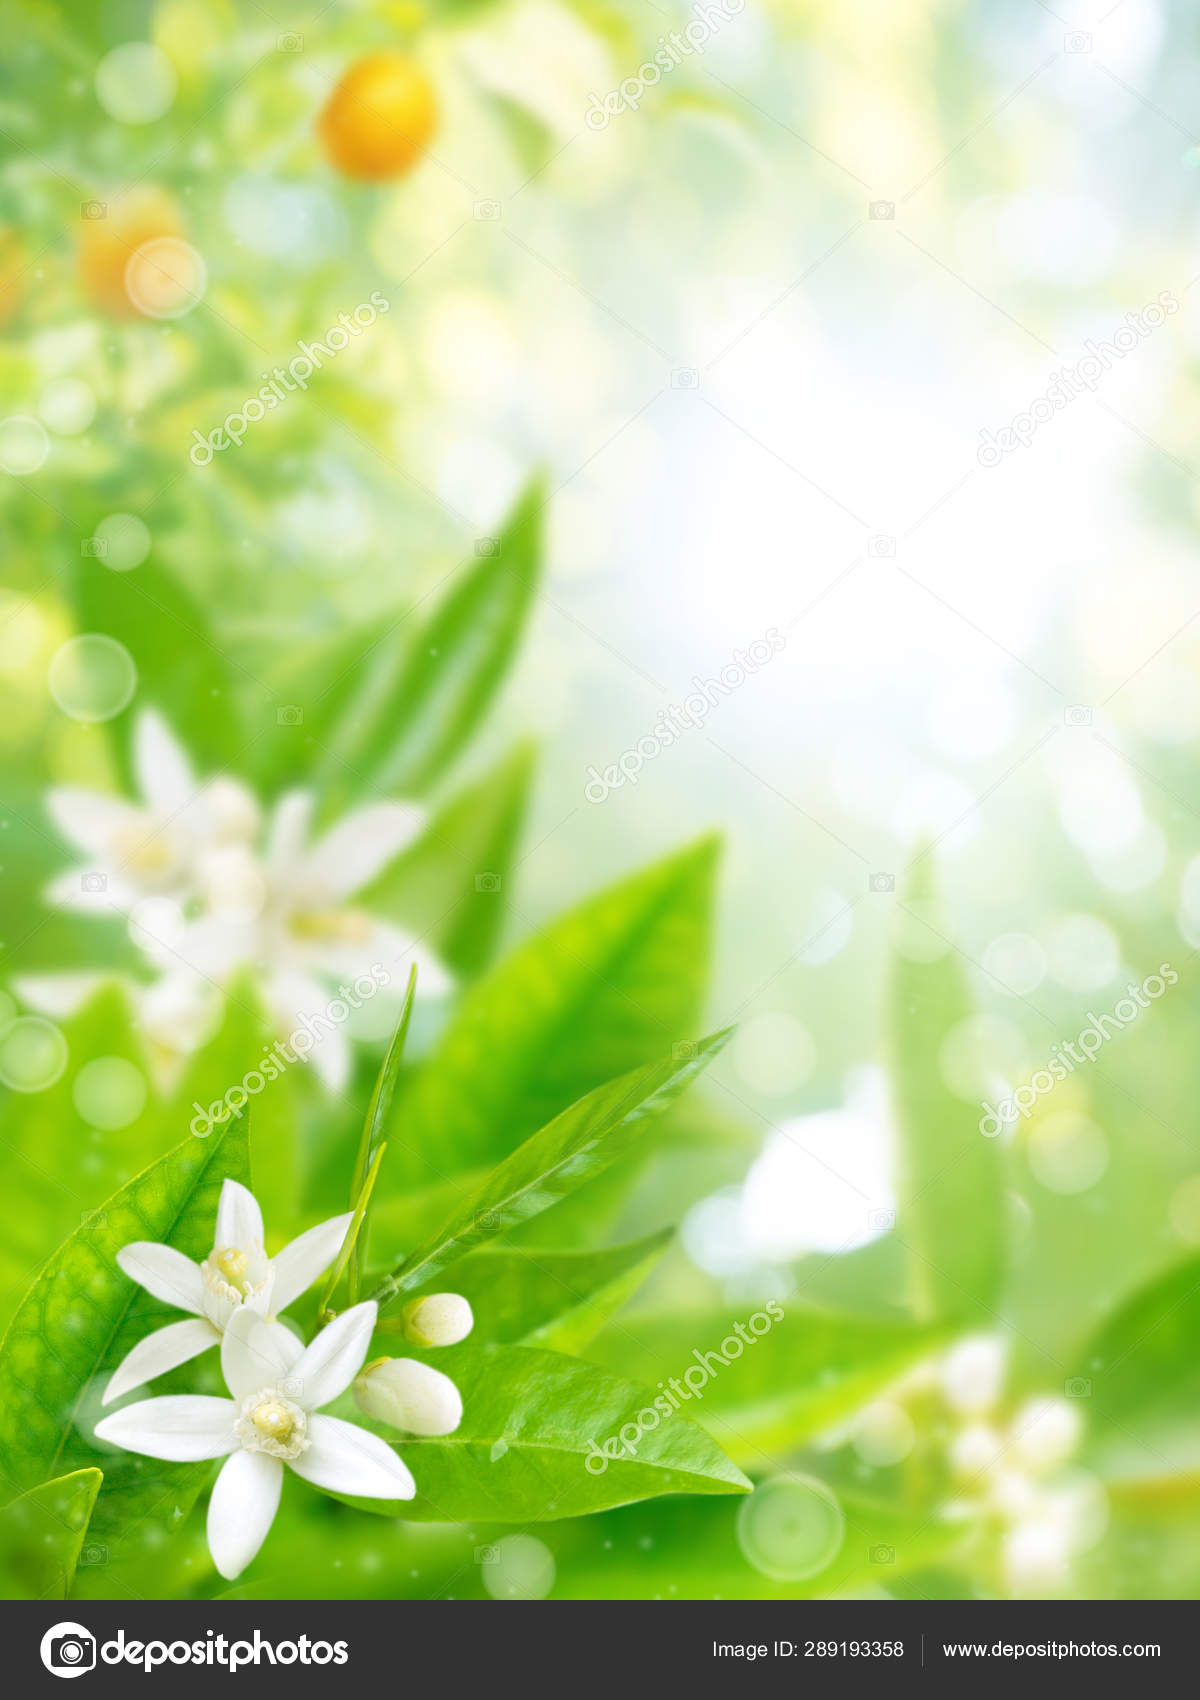 Orange garden in bloom blurred background Stock Photo by ©photohampster  289193358